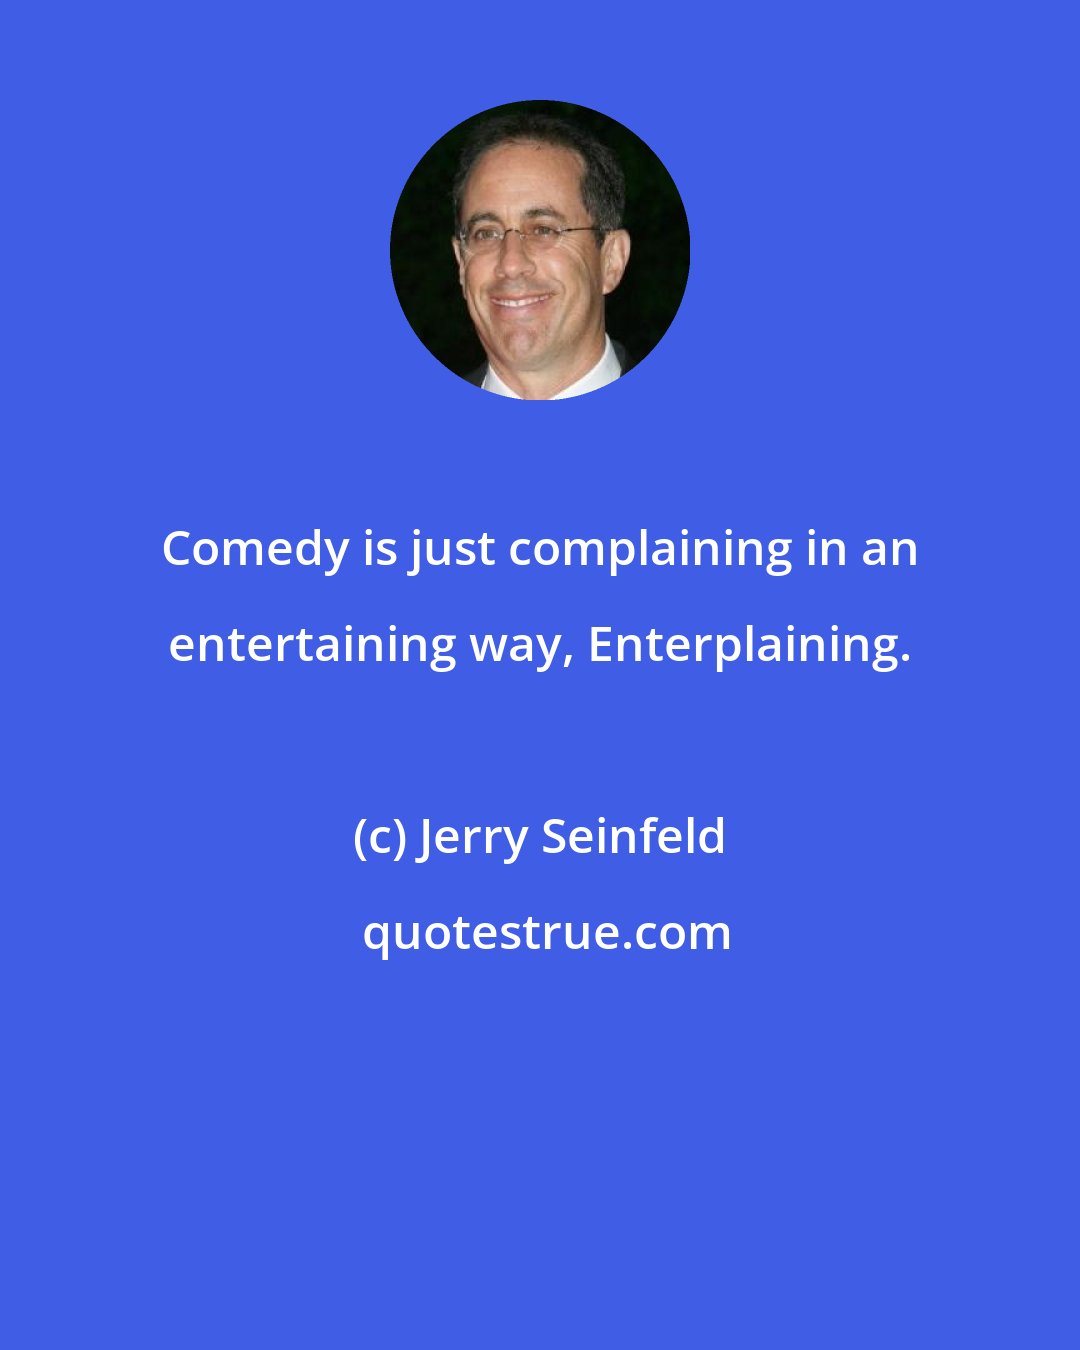 Jerry Seinfeld: Comedy is just complaining in an entertaining way, Enterplaining.